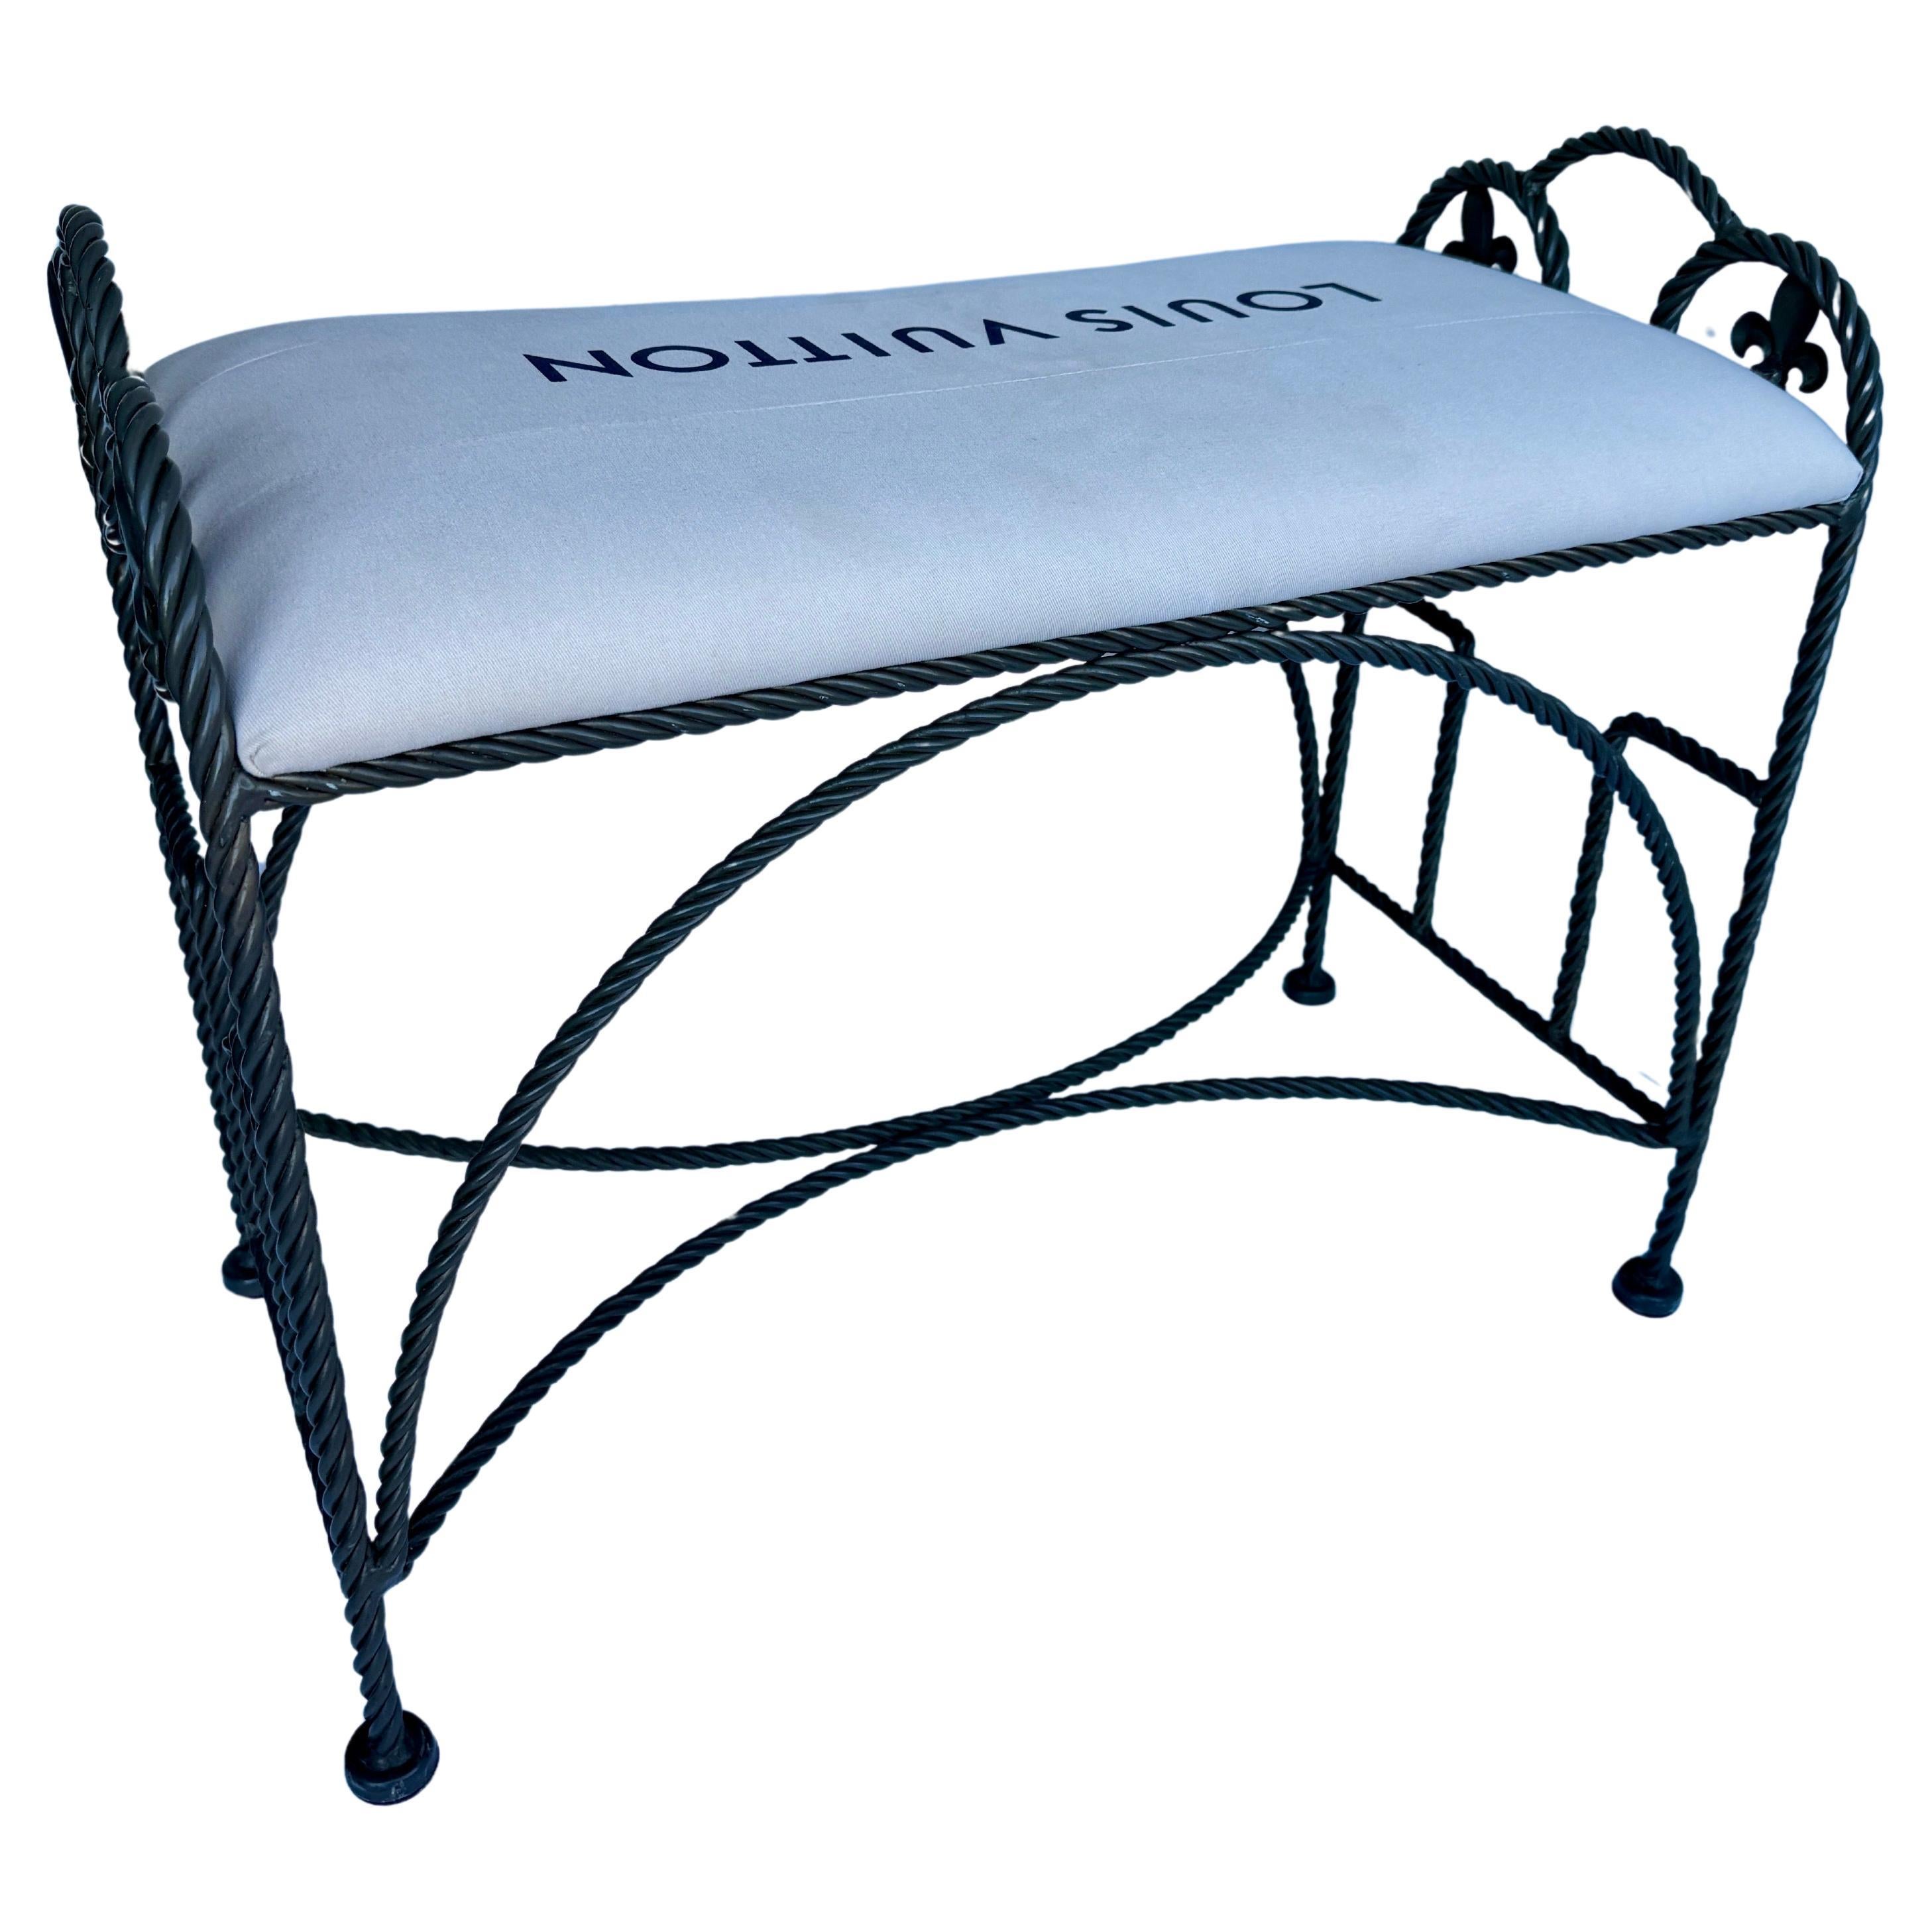 Vintage Roped Iron Bench With Louis Vuitton Bag Fabric, France

Design and purpose best describe this one-of-a-kind custom bench. This piece features authentic Louis Vuitton material atop a very sturdy rope bench, with fleur de lis detailing, in a